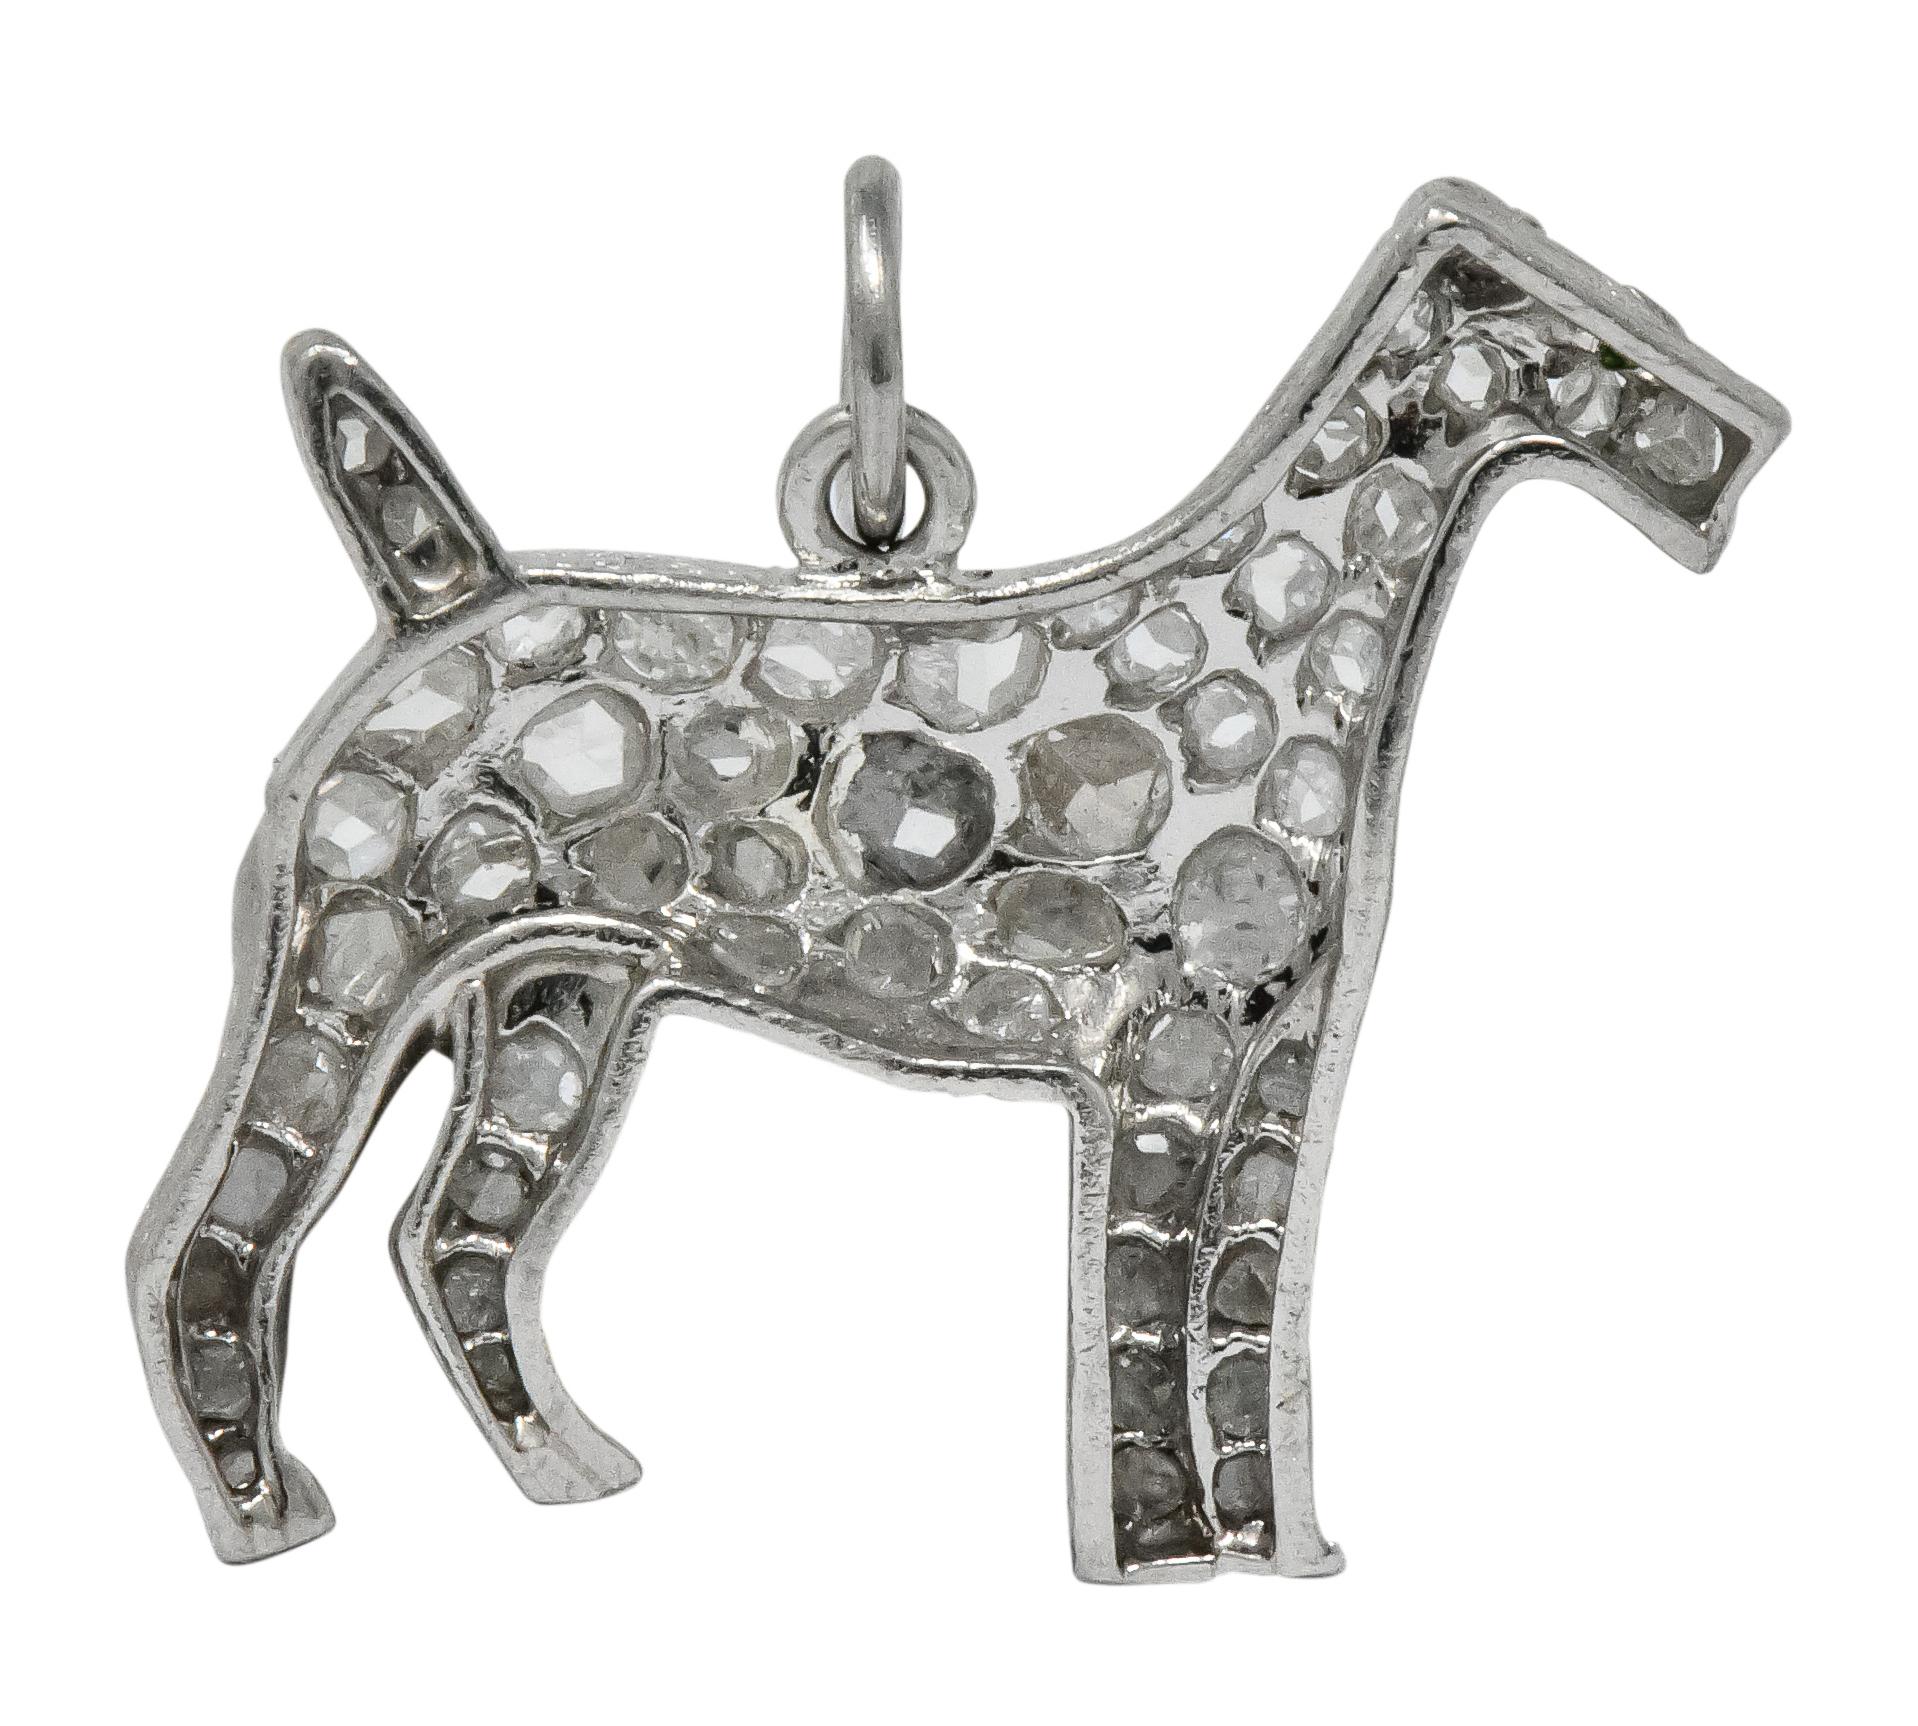 Charm designed as Airedale Terrier with millegrain edges and is pavé set throughout with rose cut diamonds weighing approximately 0.50 carat total

Accented with a green stone eye

Tested as platinum

Circa 1915

Measures: 3/4 x 3/4 inch

Total